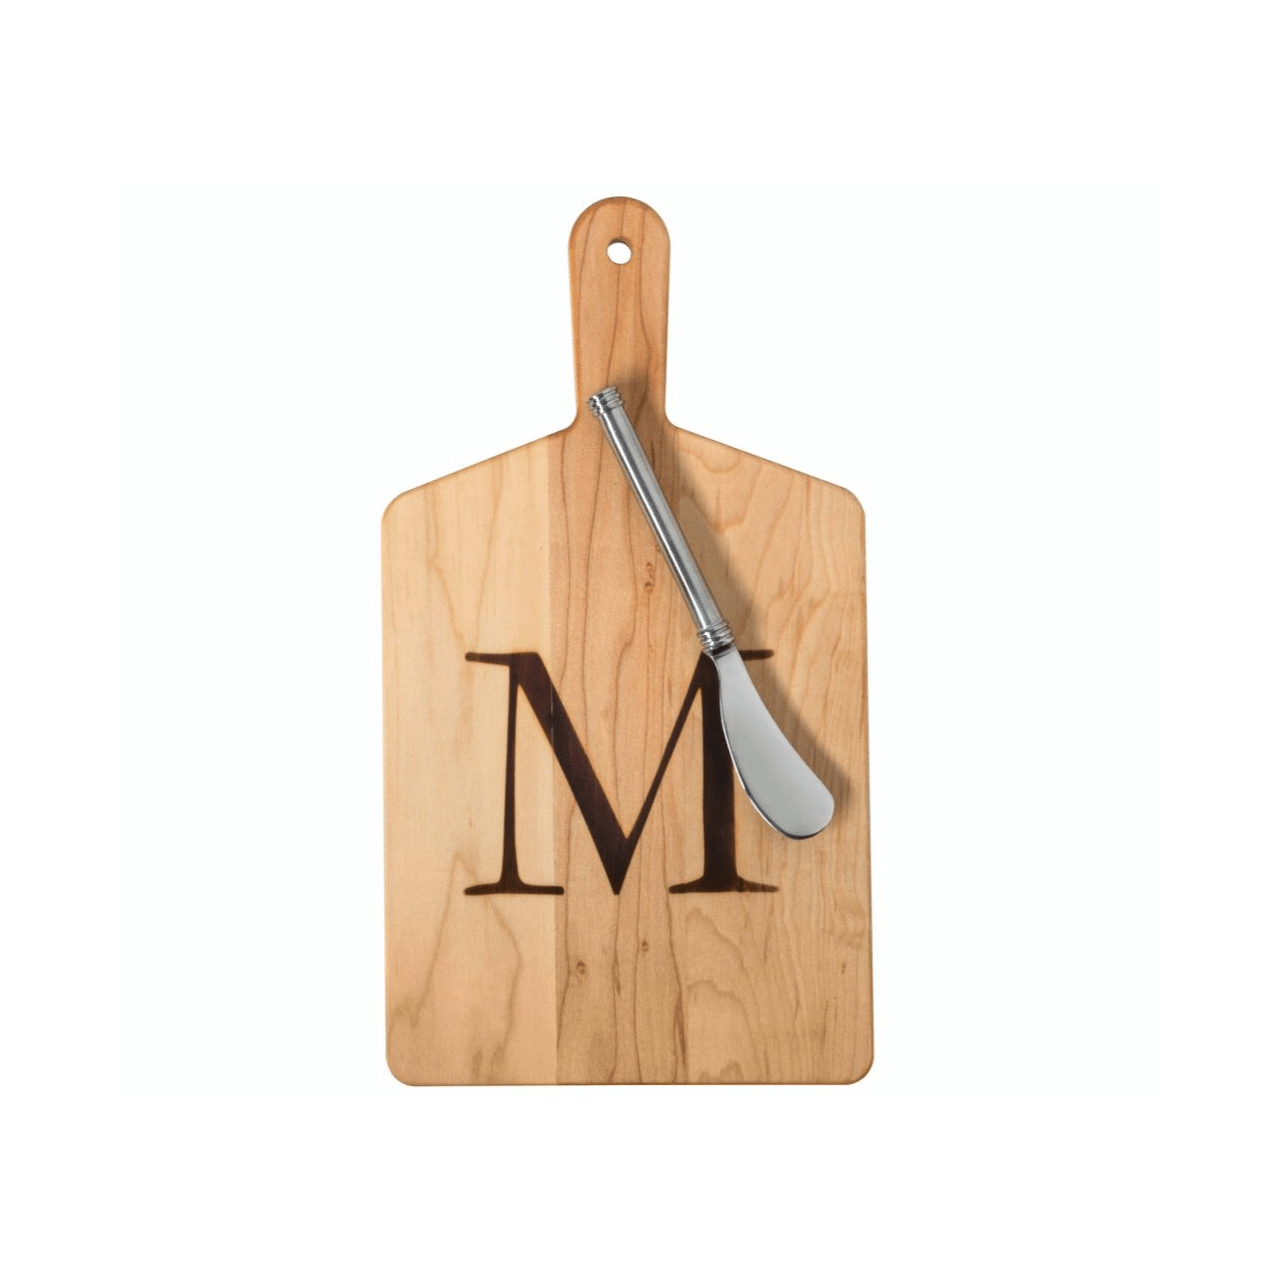 Maple Cheese Board with a Stamped G and Metal Spreader